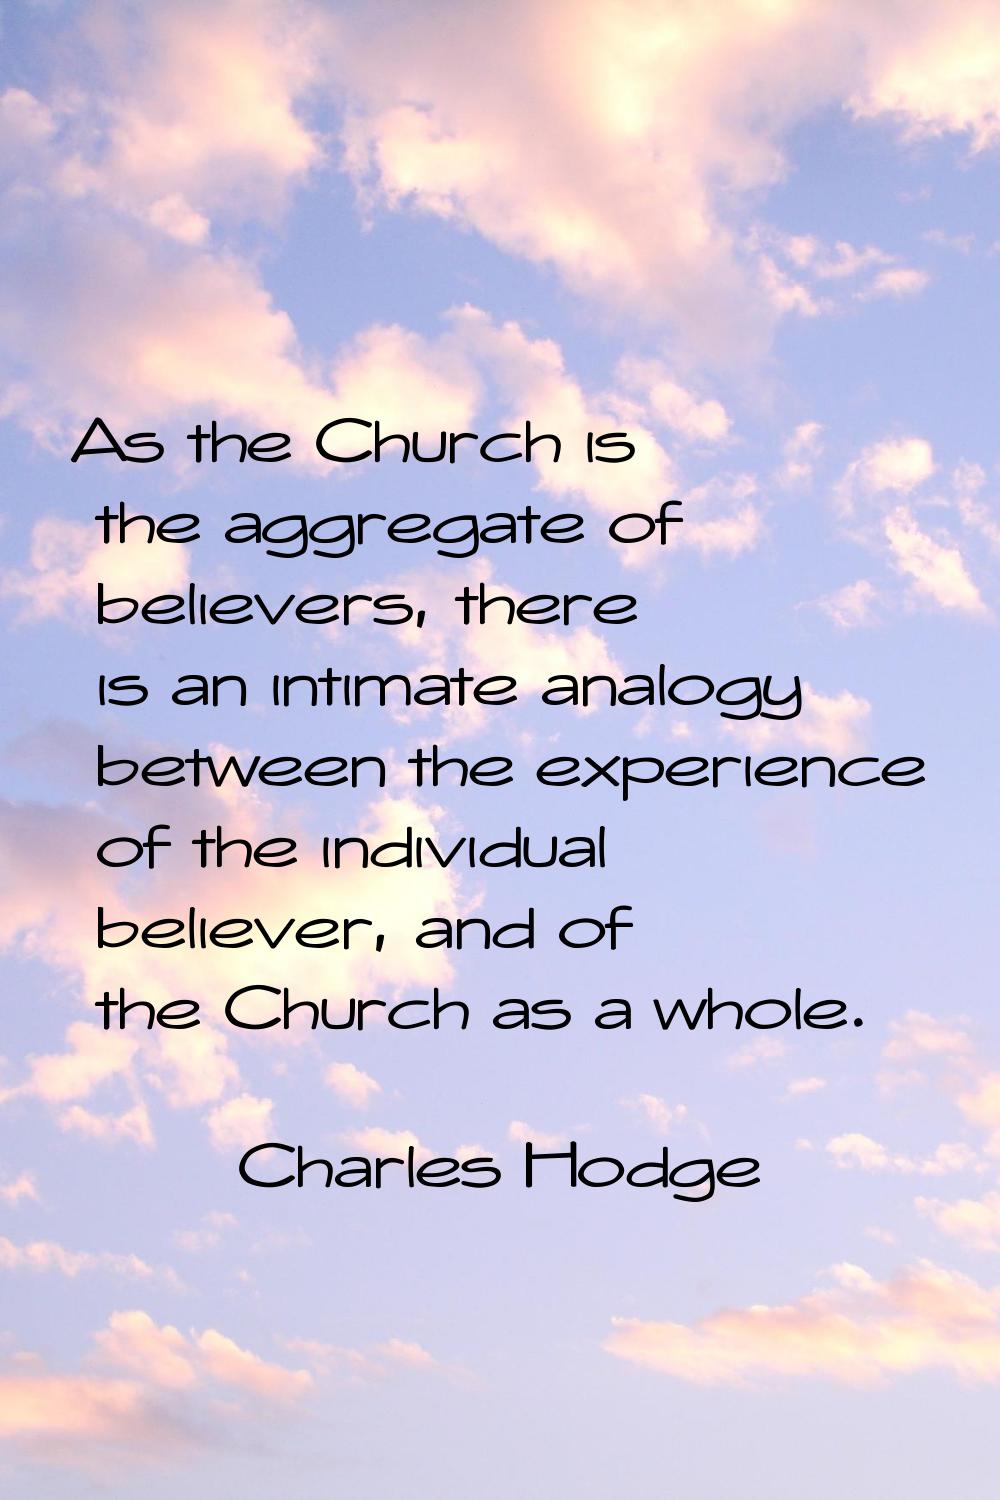 As the Church is the aggregate of believers, there is an intimate analogy between the experience of